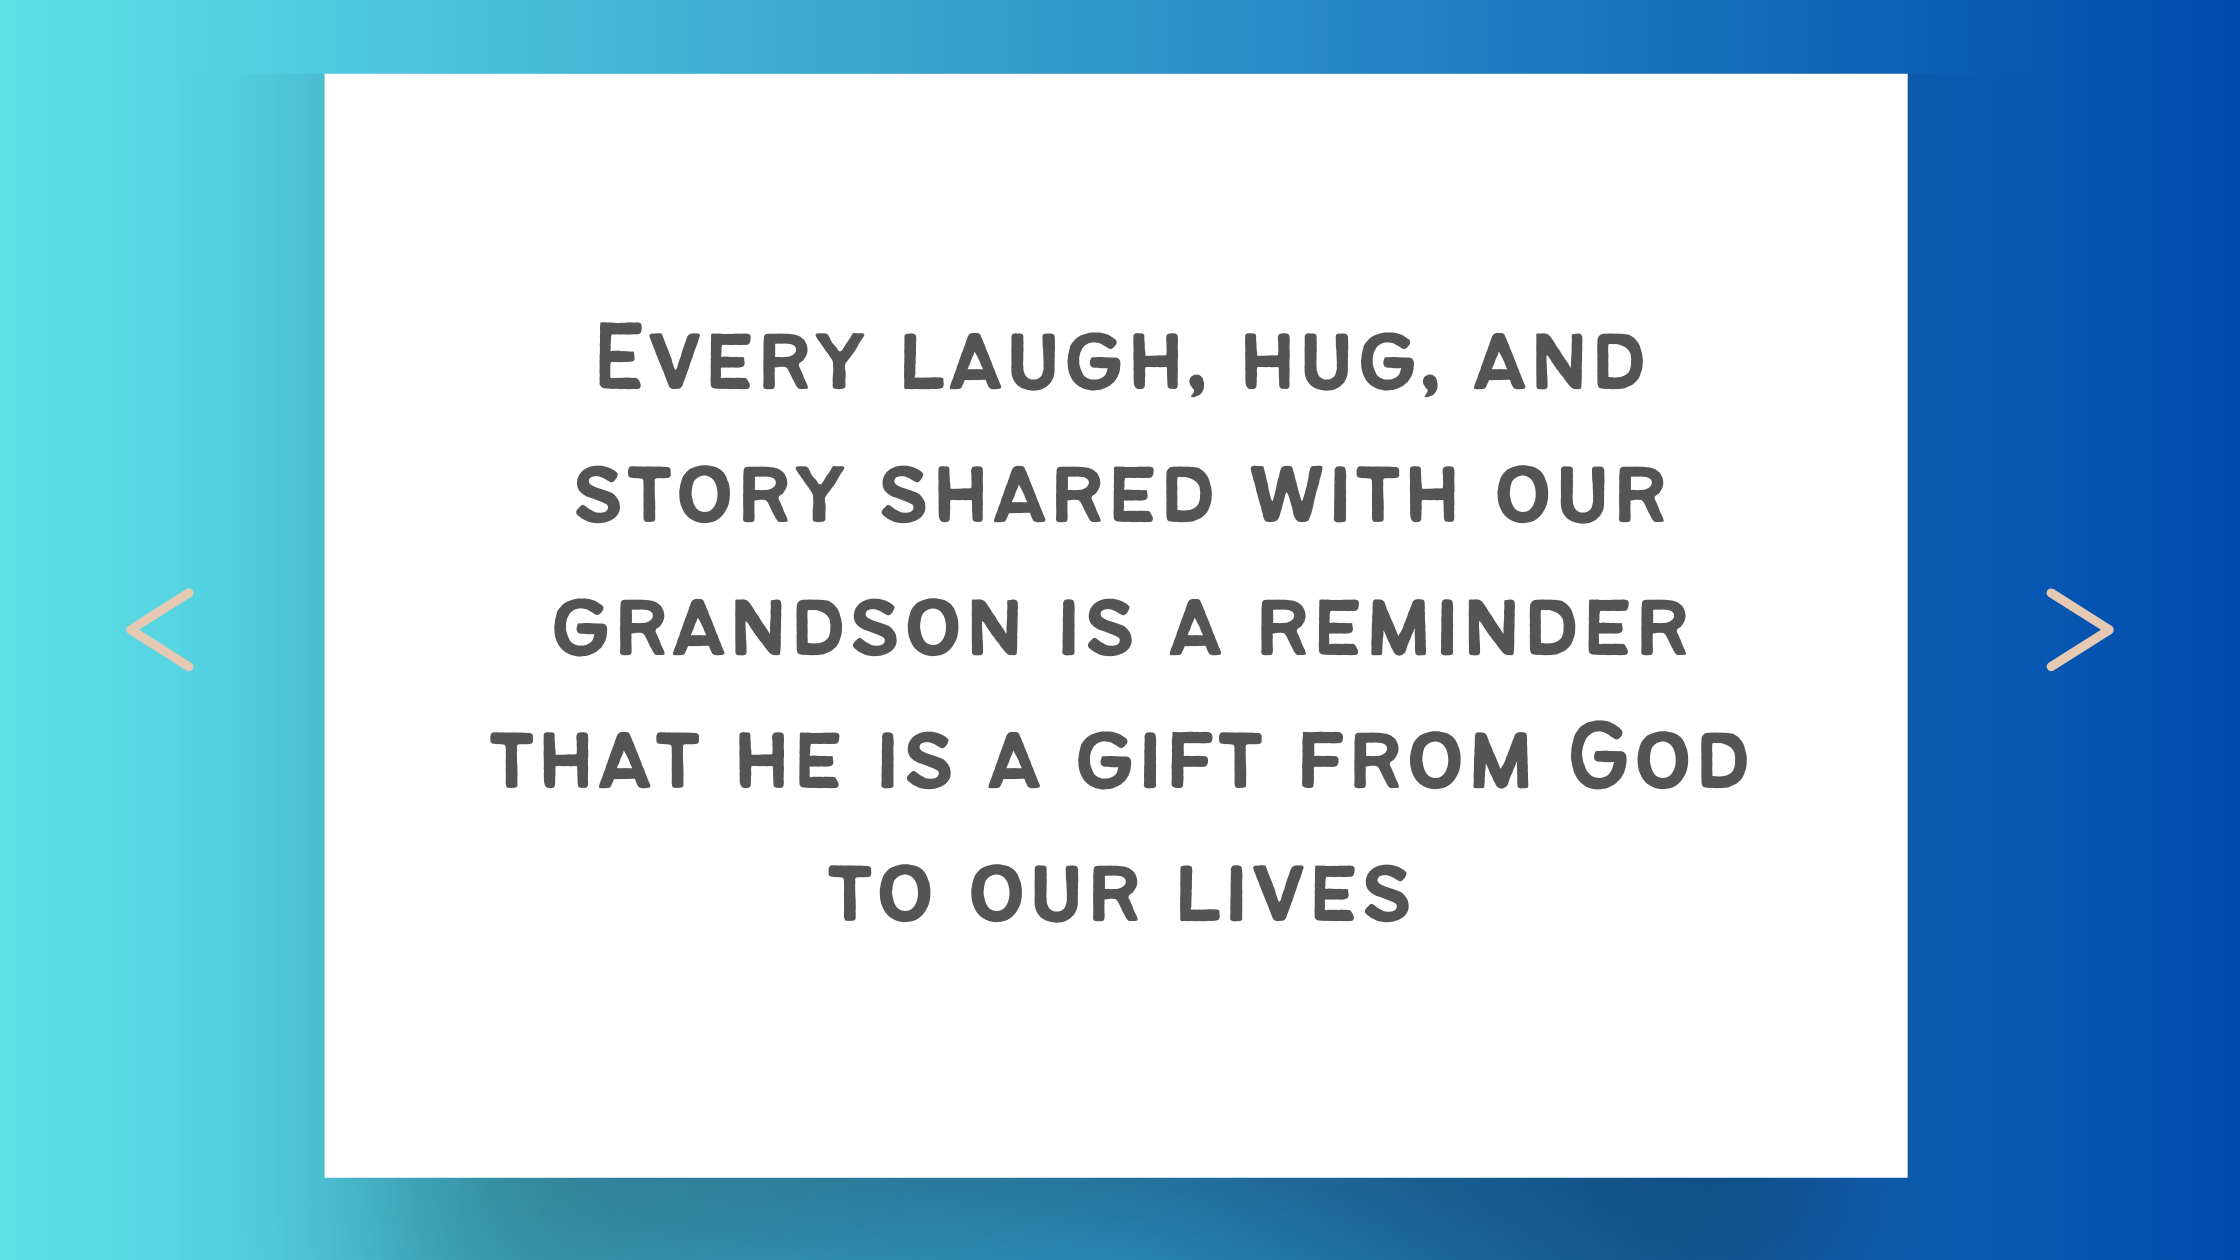 10 Inspiring "Grandson Gift from God" Quotes from Grandparents 🌟 – June 11, 2023